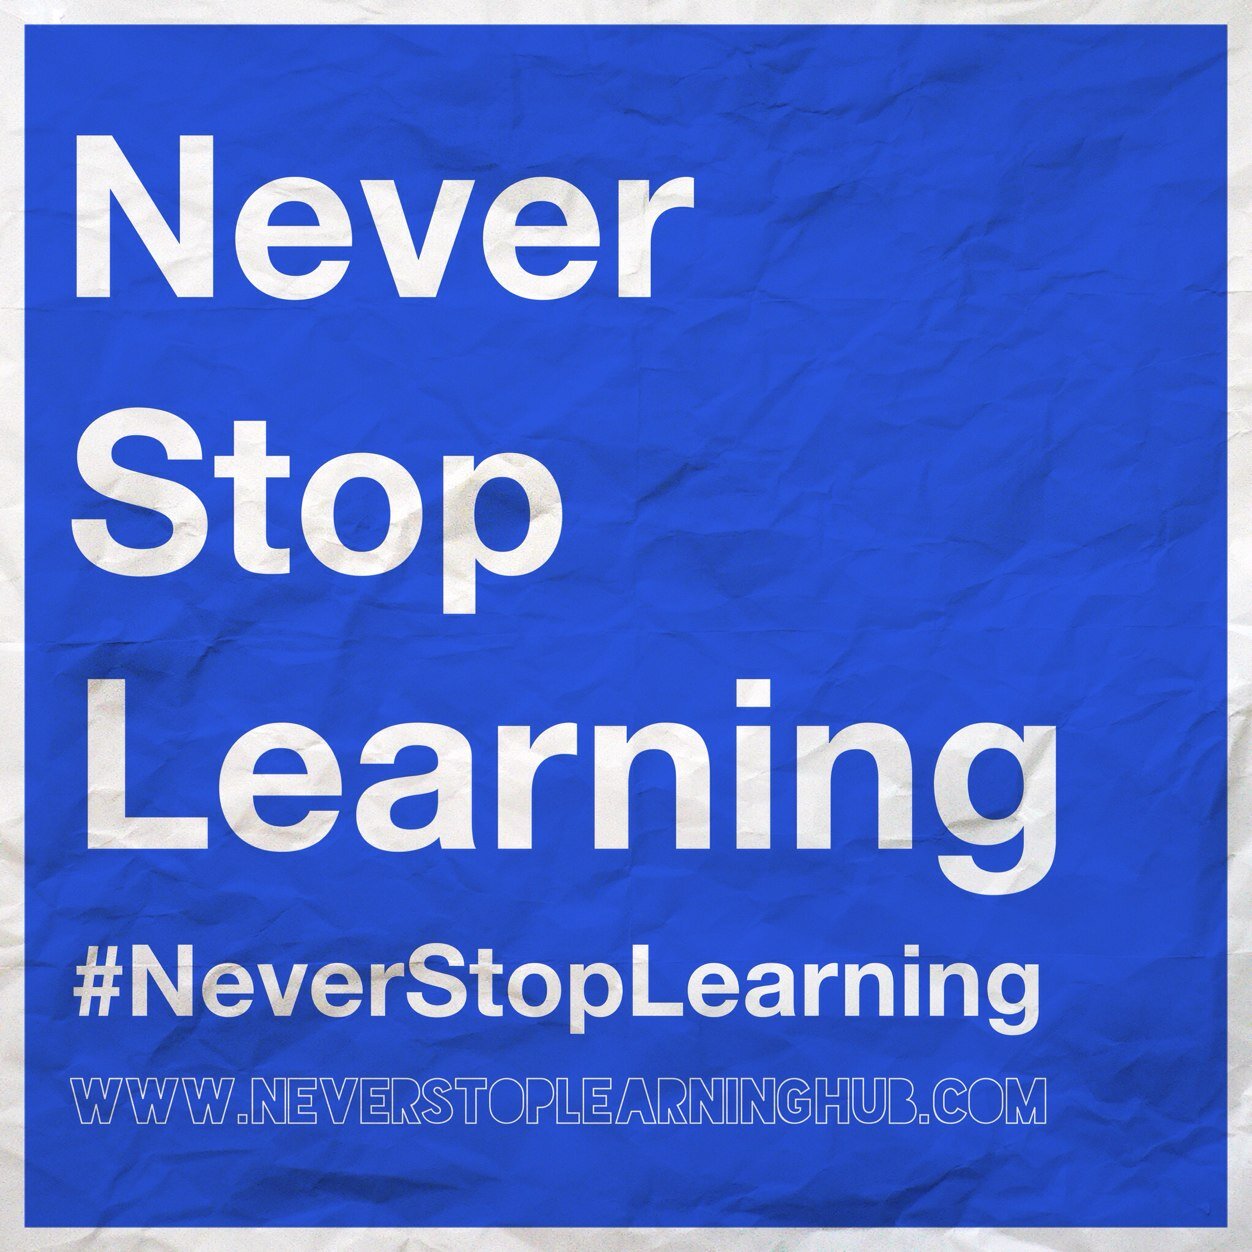 Sharing remarkable things. Devoted to meaningful work. #neverstoplearning #TMNSL